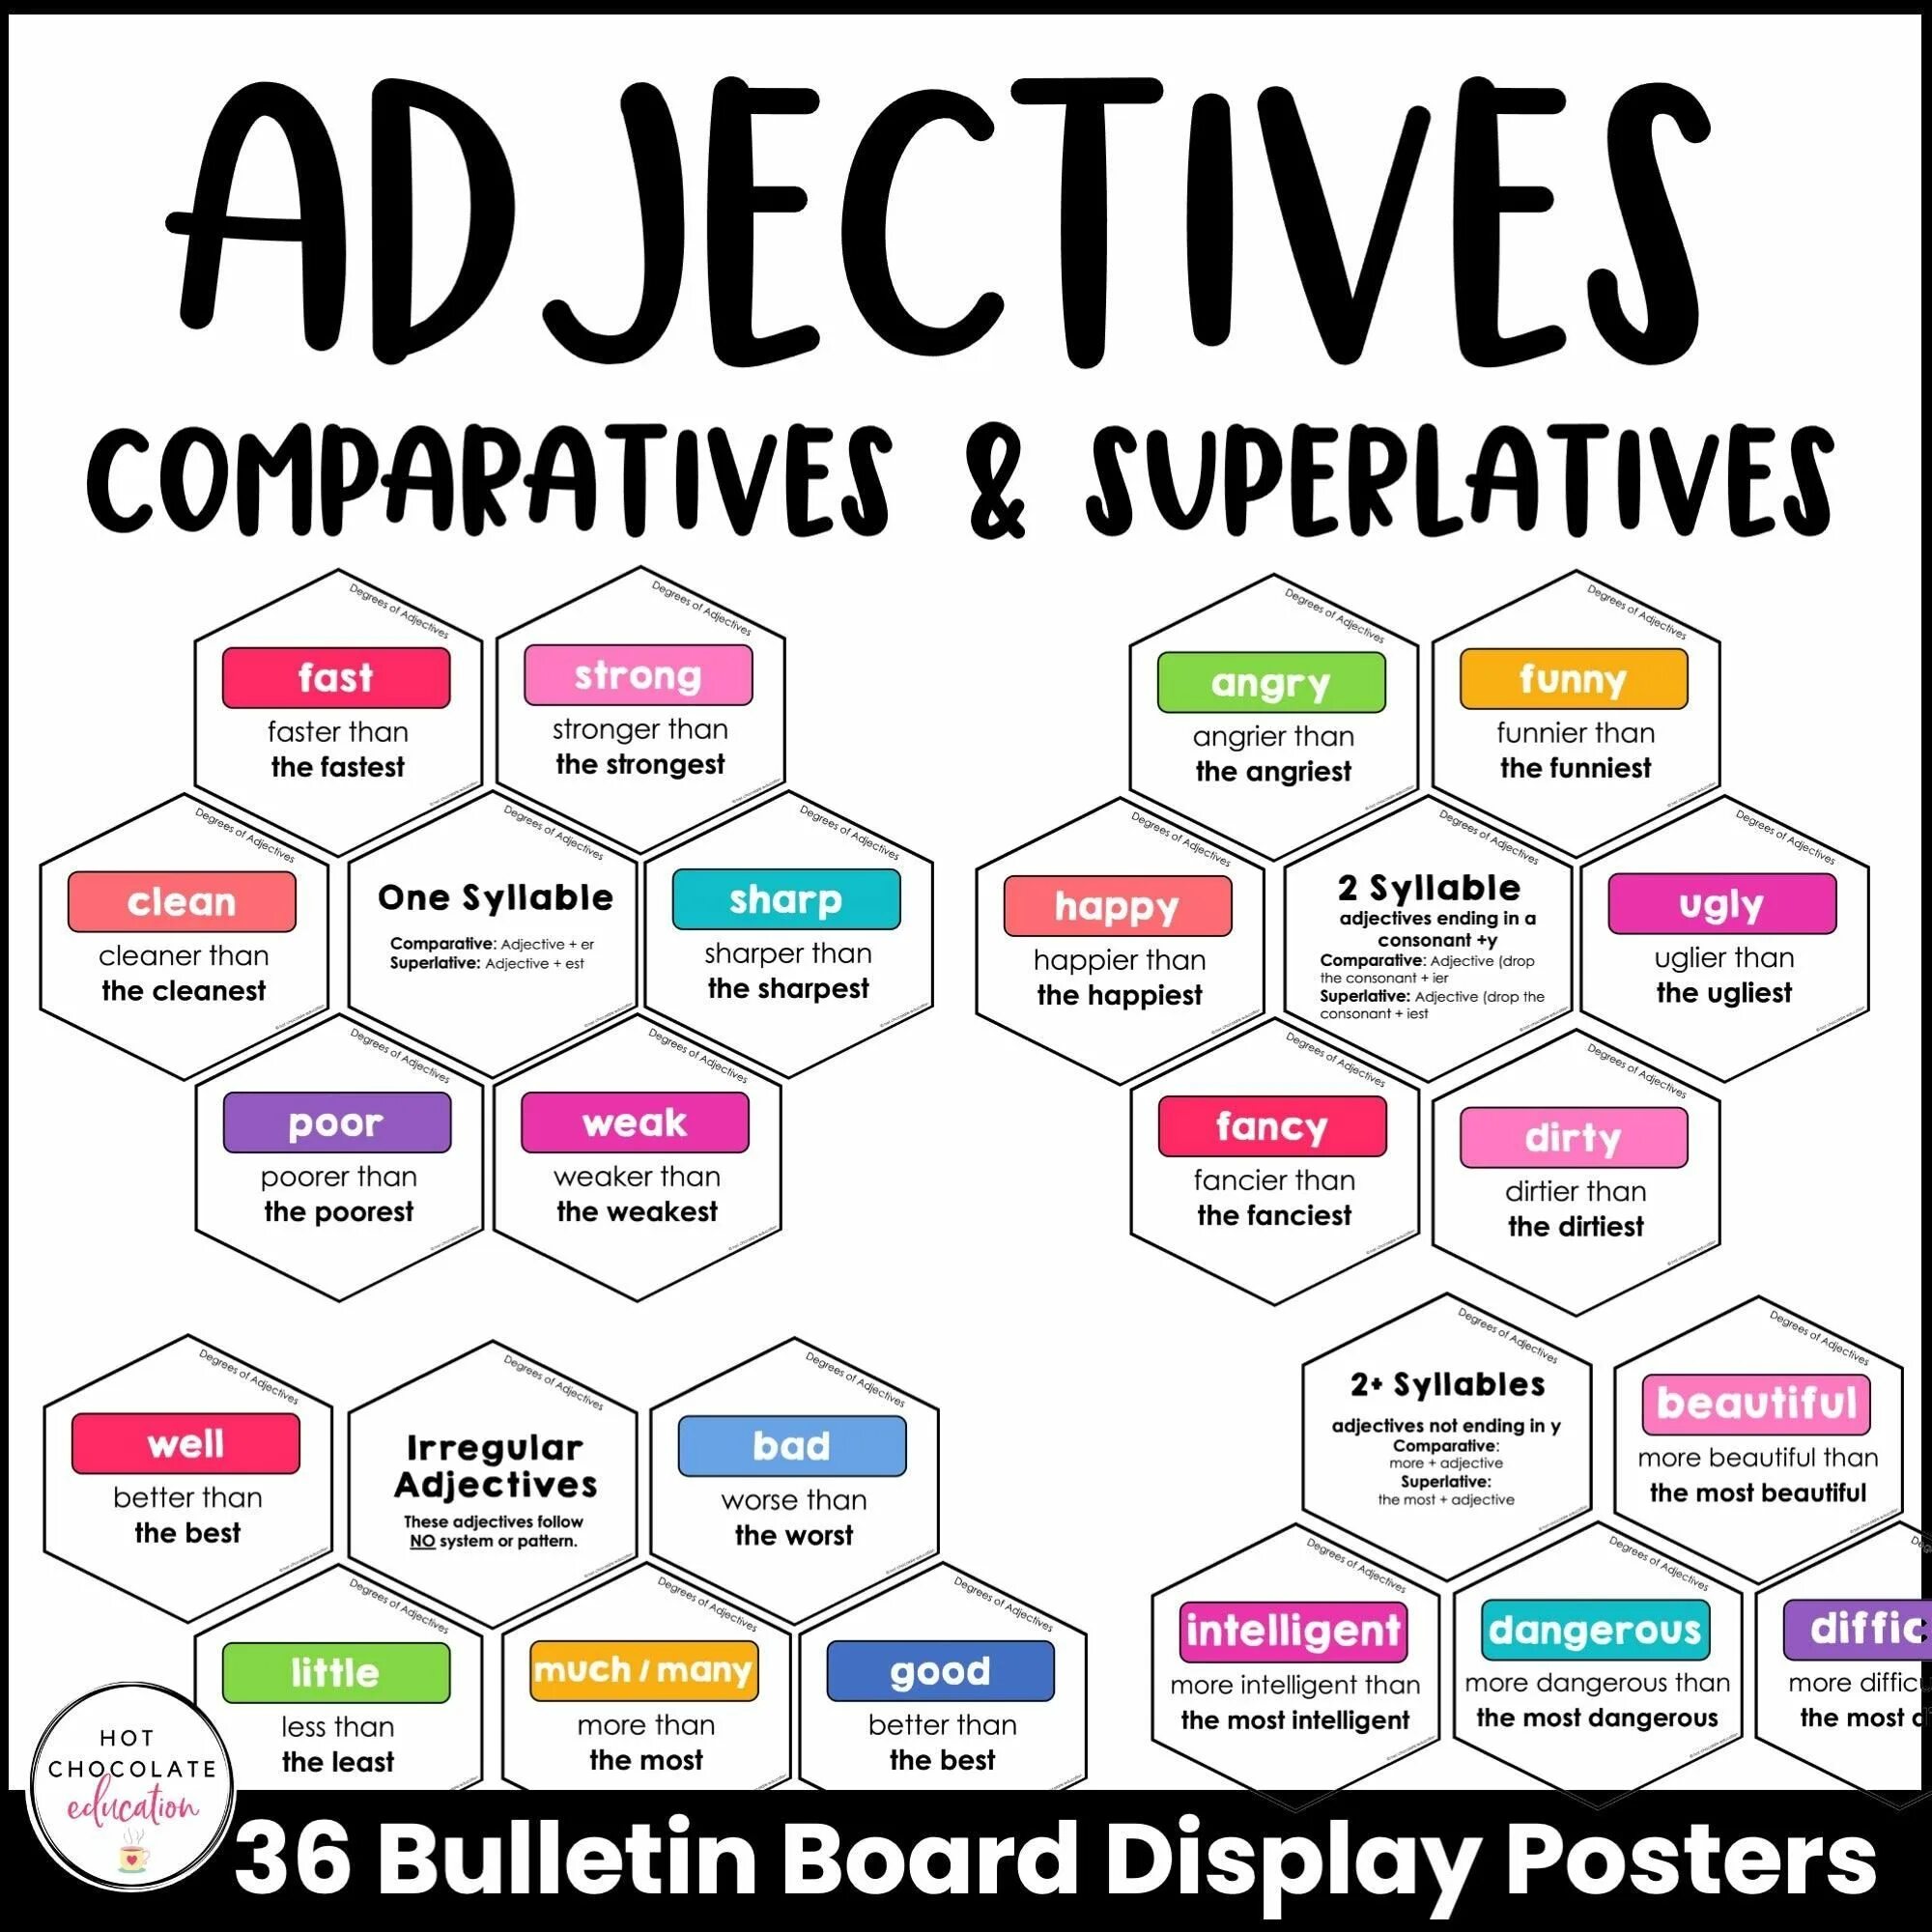 Comparatives and Superlatives Board game. Superlative adjectives Board game. Degrees of Comparison Board game. Comparative and Superlative adjectives boardgame. Hot comparative and superlative